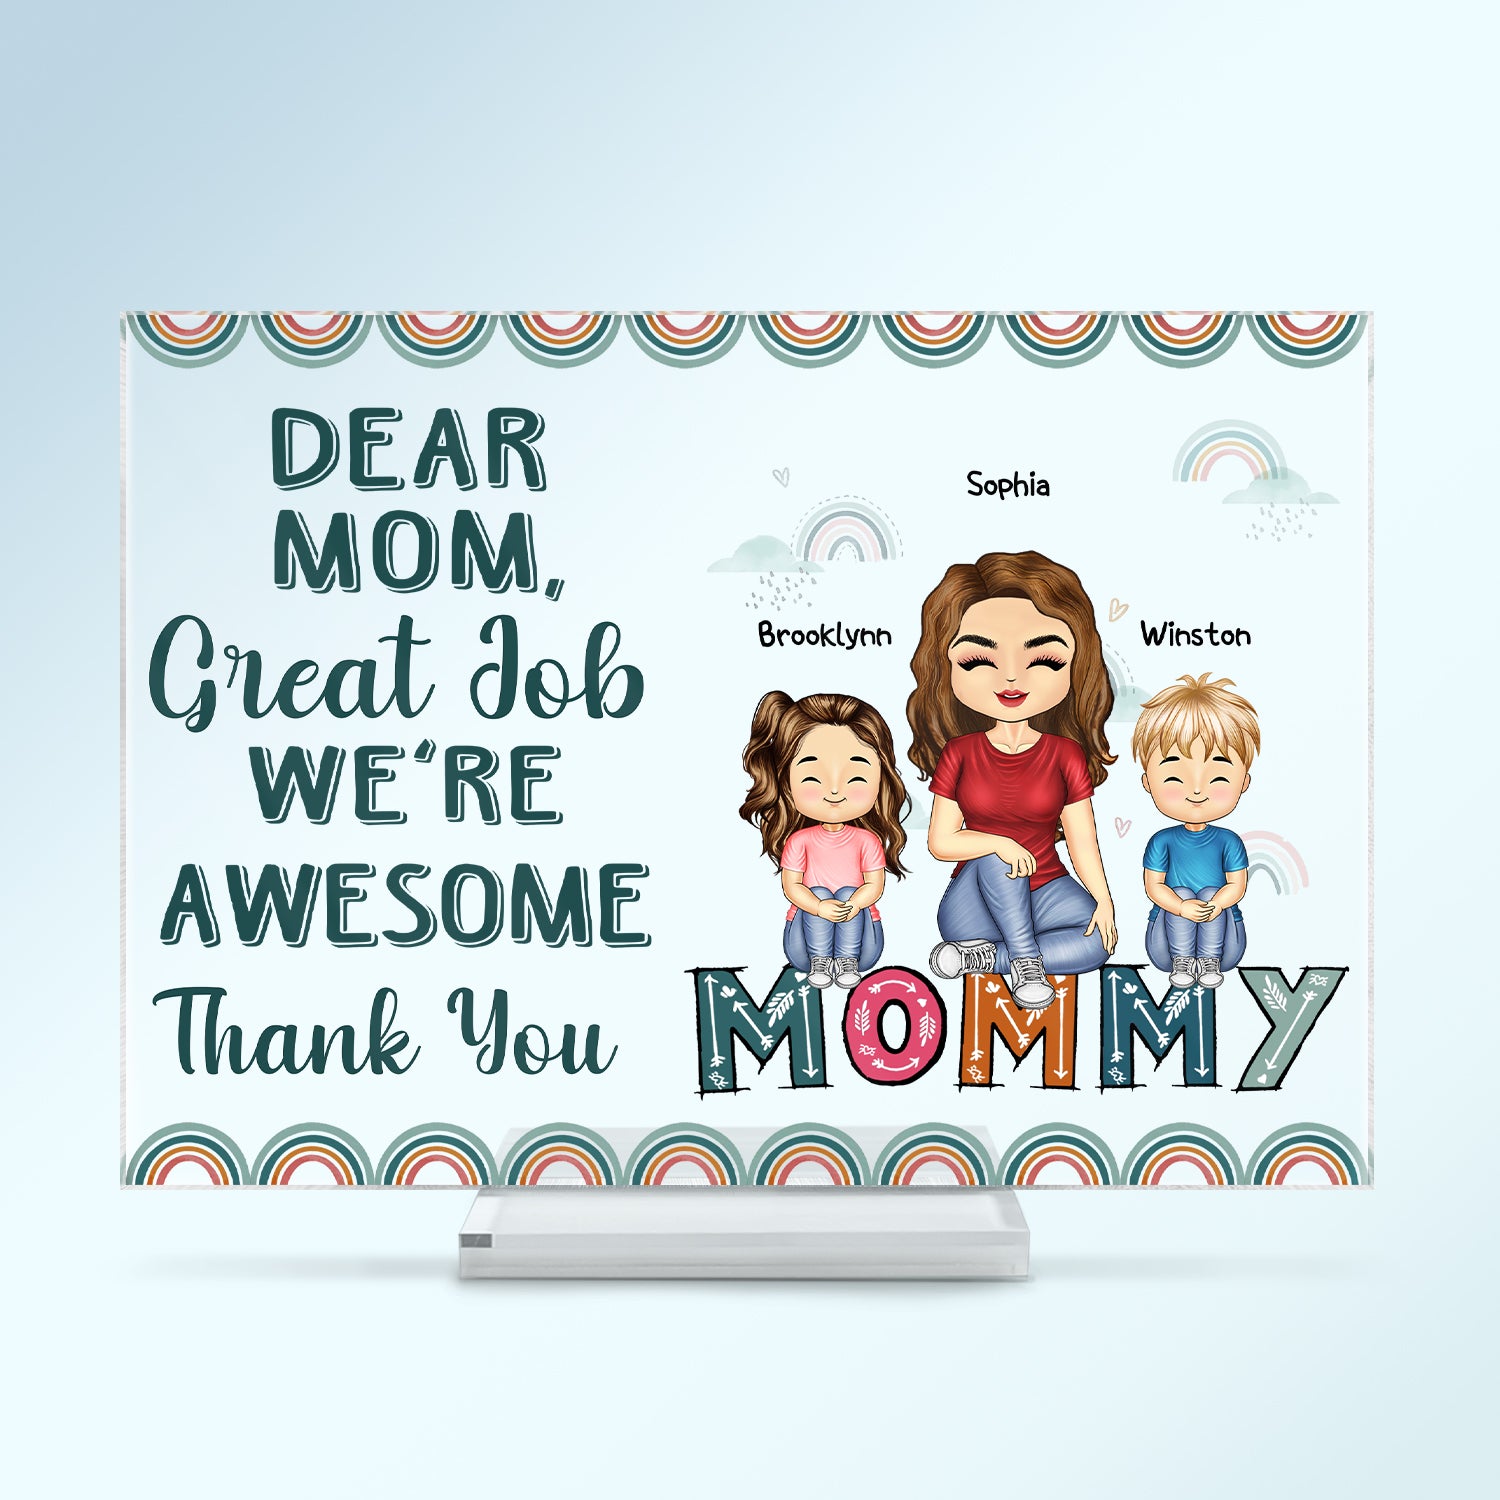 Dear Mom Great Job We're Awesome Thank You - Birthday, Loving Gift For Mom, Mother, Grandma, Grandmother - Personalized Custom Horizontal Rectangle Acrylic Plaque